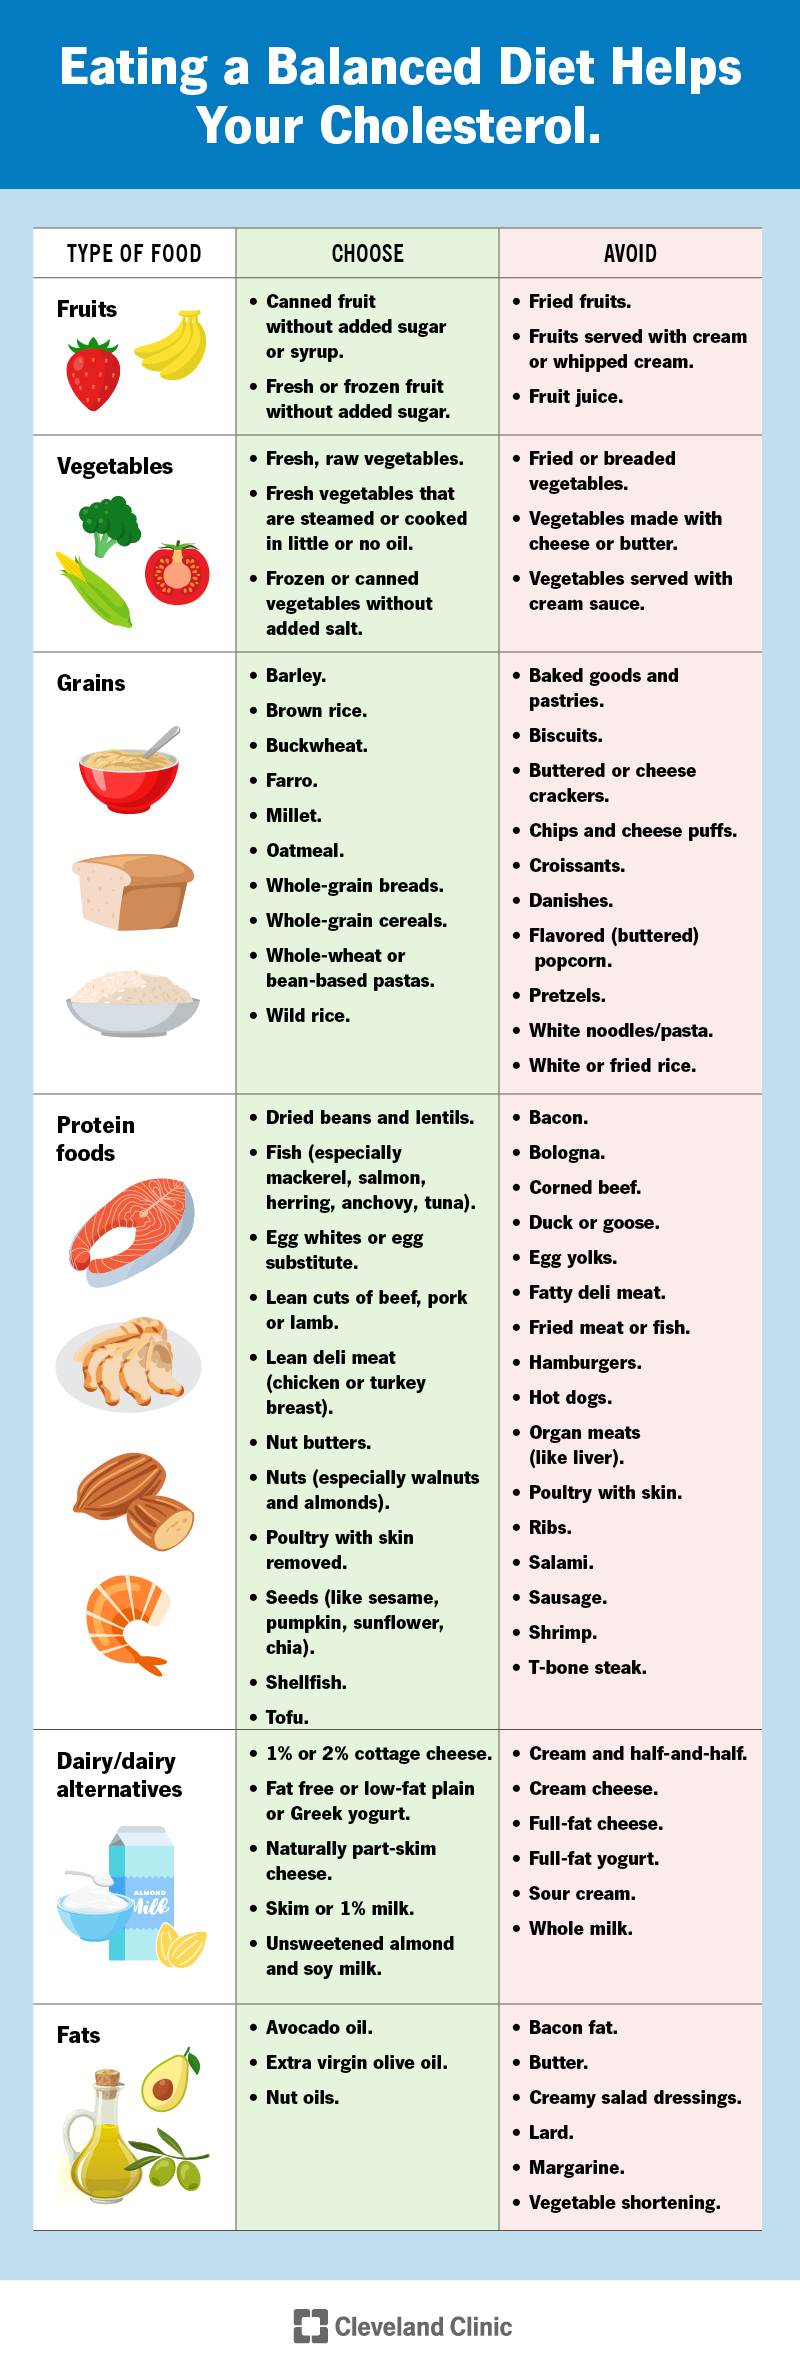 Foods to choose and foods to avoid to have a balanced diet for healthy cholesterol